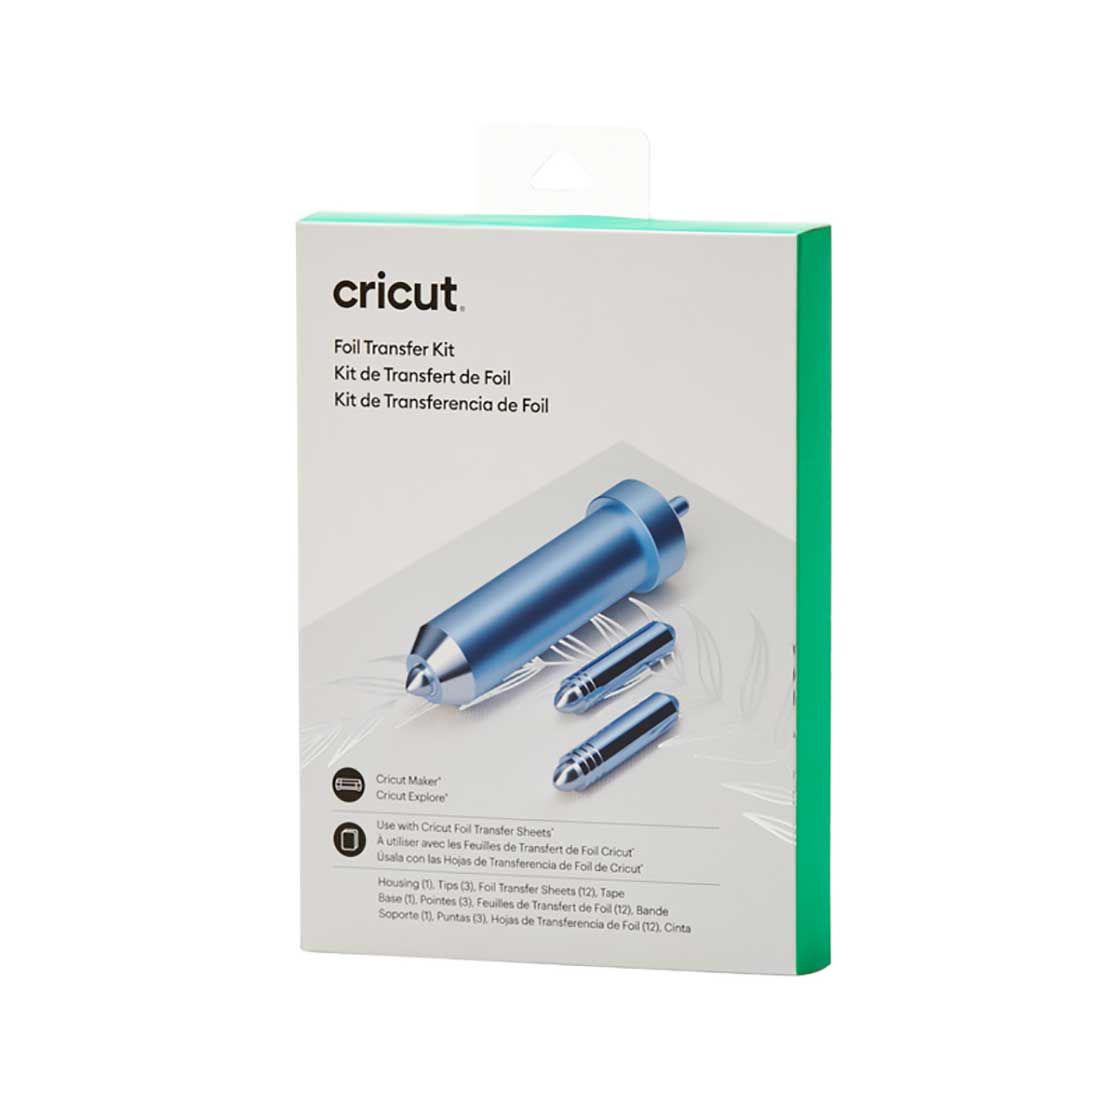 Cricut: Foil Transfer Tool And 3 Replacement Tips